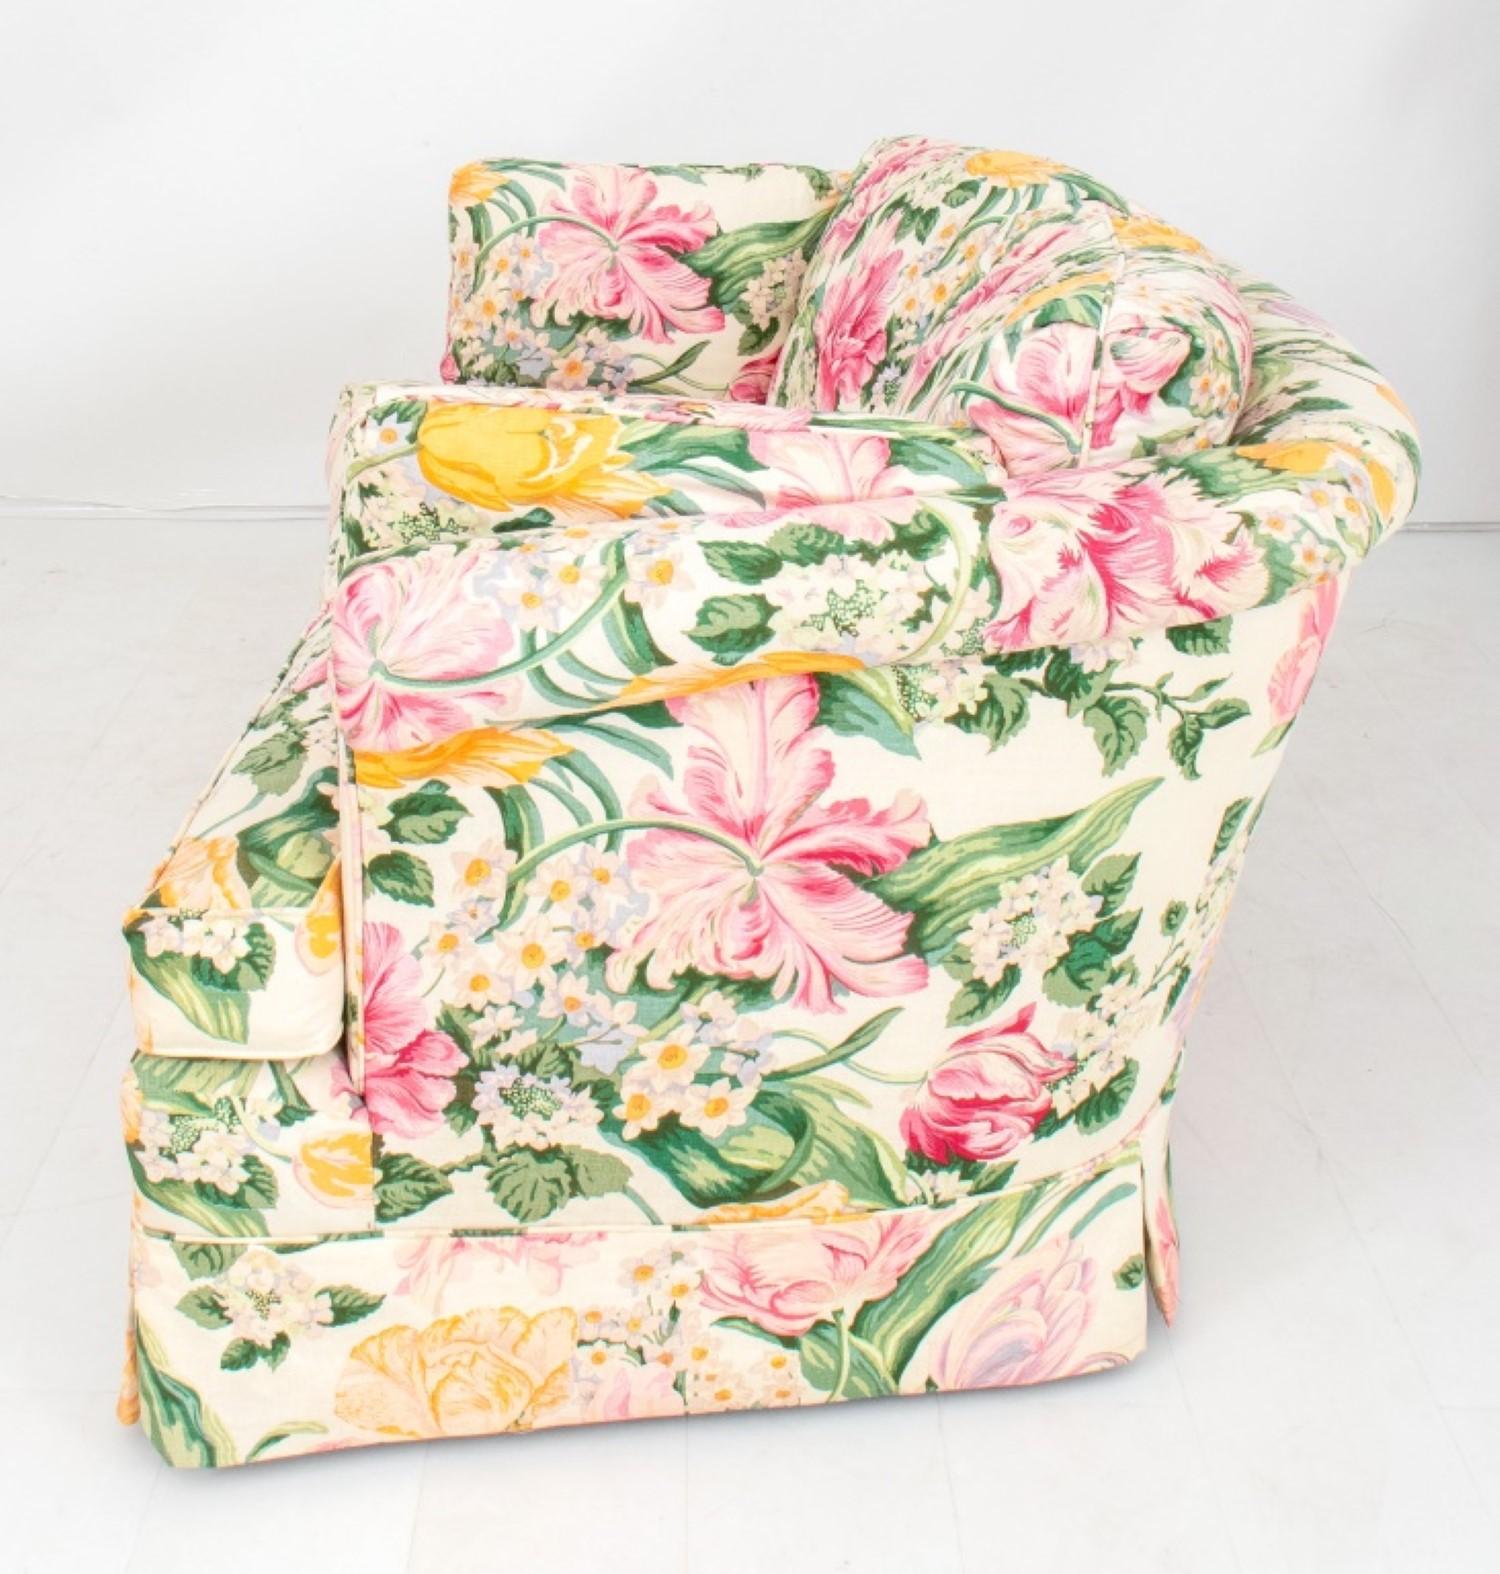 
The dimensions for the Floral Chintz Slipcovered Upholstered Sofa are approximately:

Height: 28